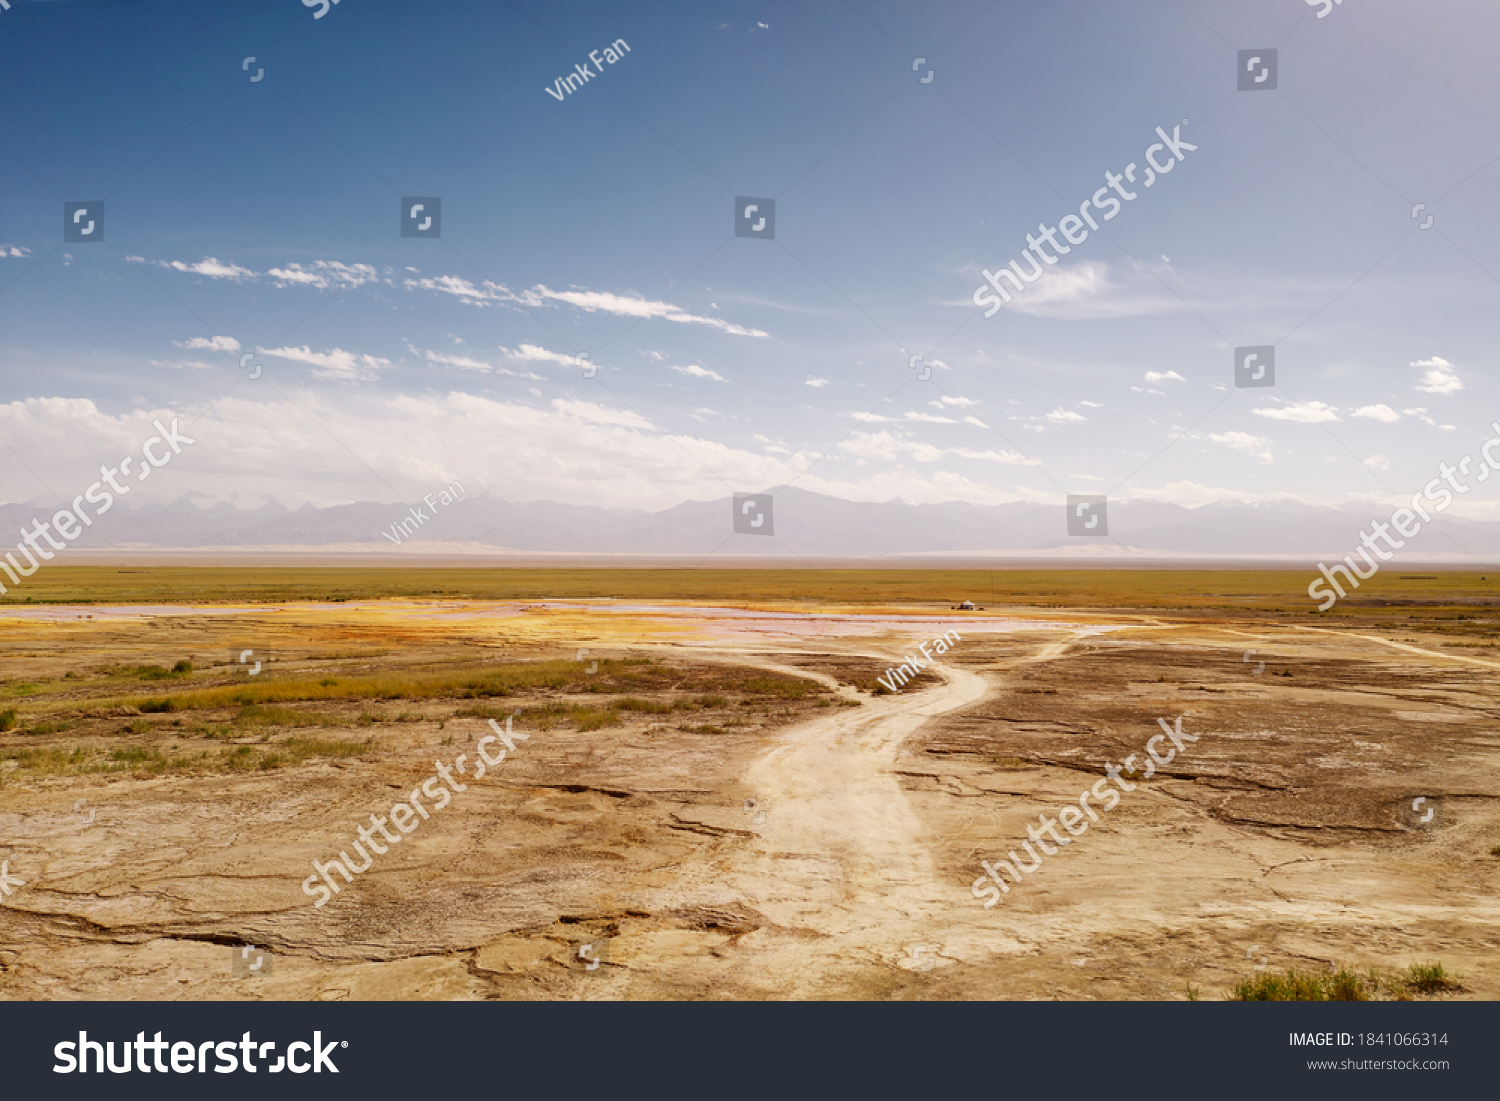 Wide deserted land with curve path. #1841066314